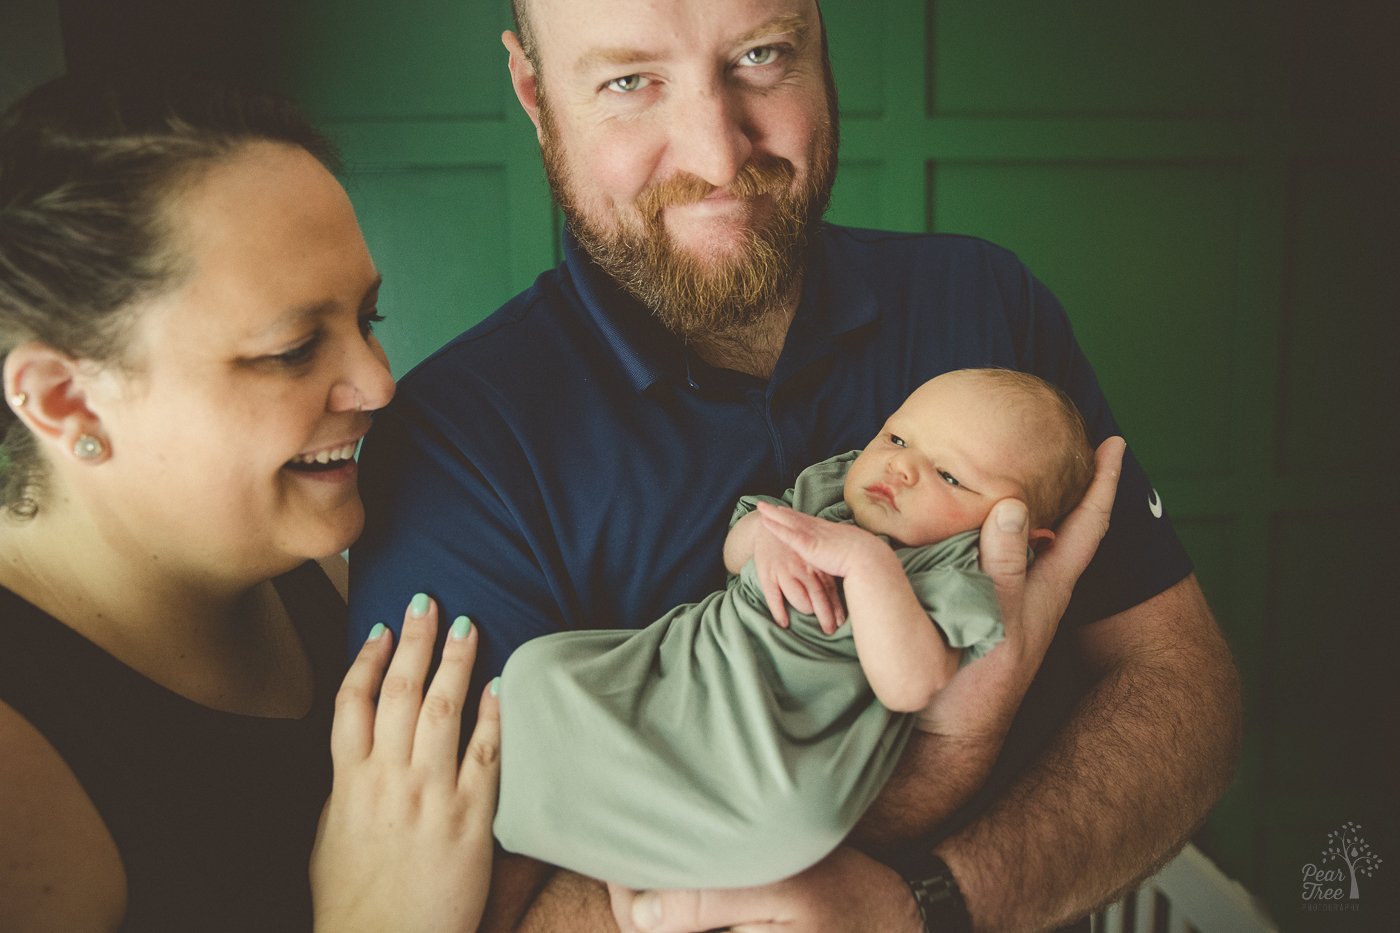 Proud dad holding his newborn son with mom smiling and her hand on his arm during their newborn photography session